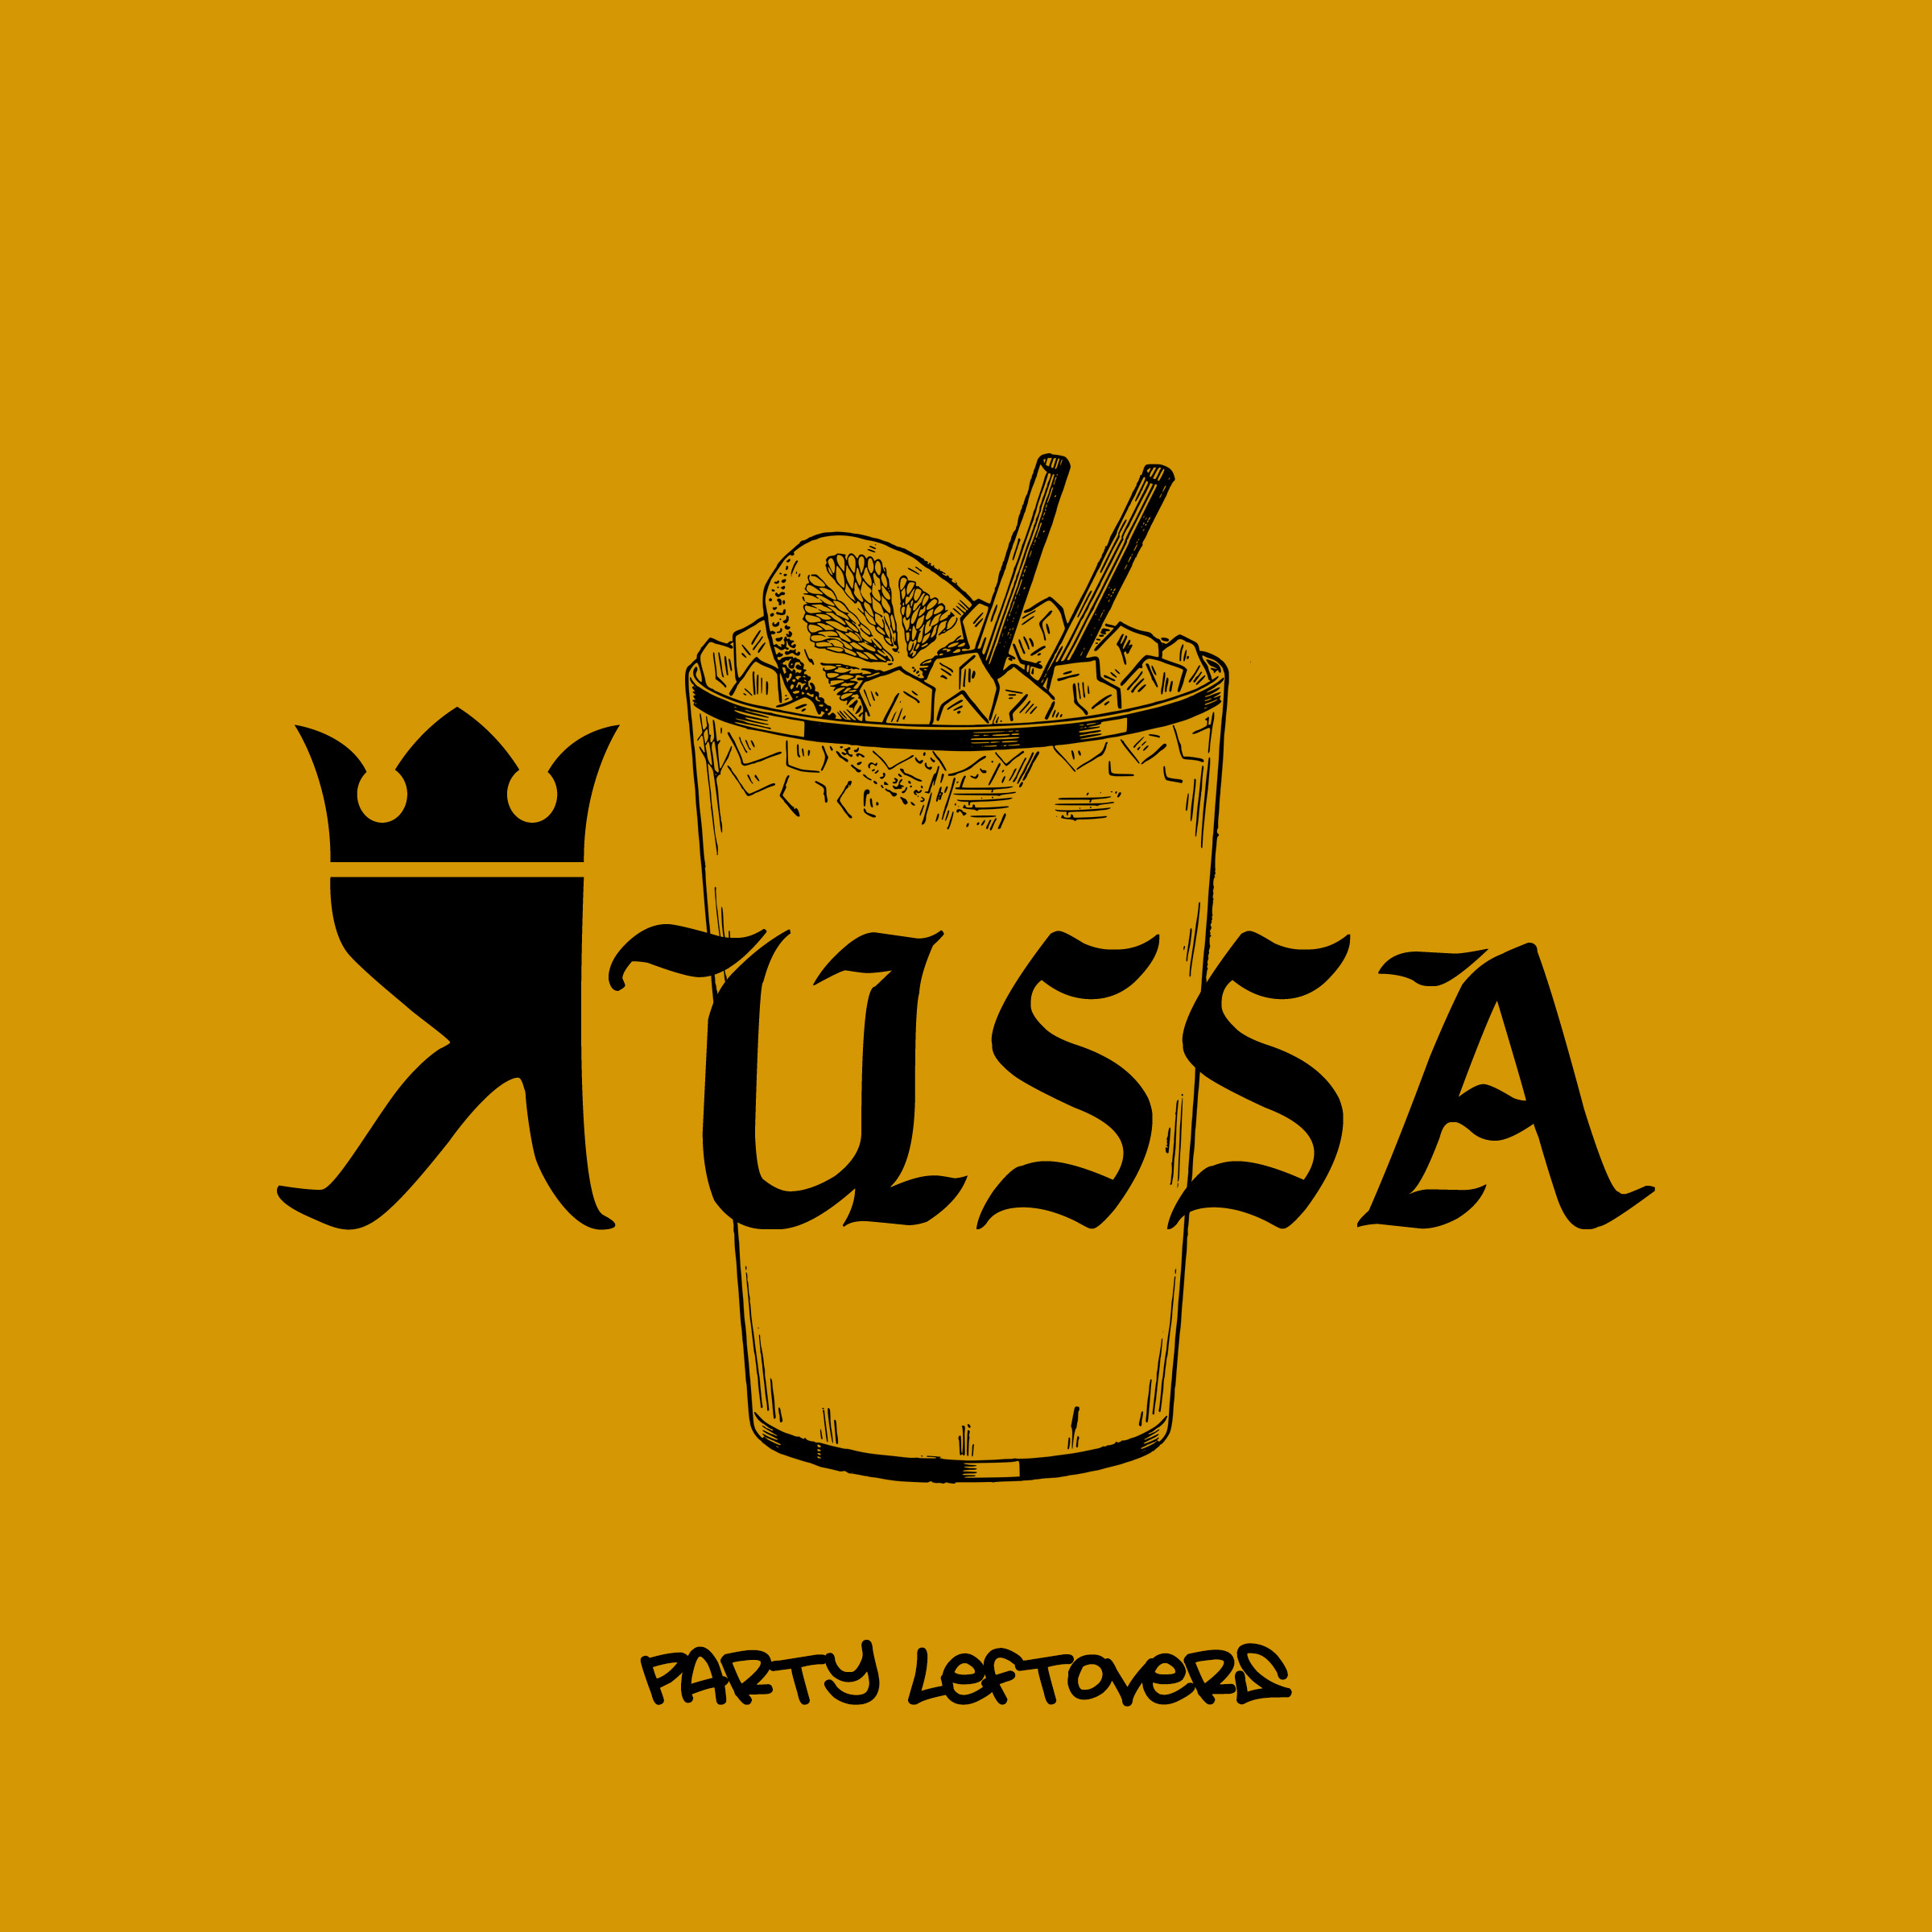 RUSSA - Party Leftovers